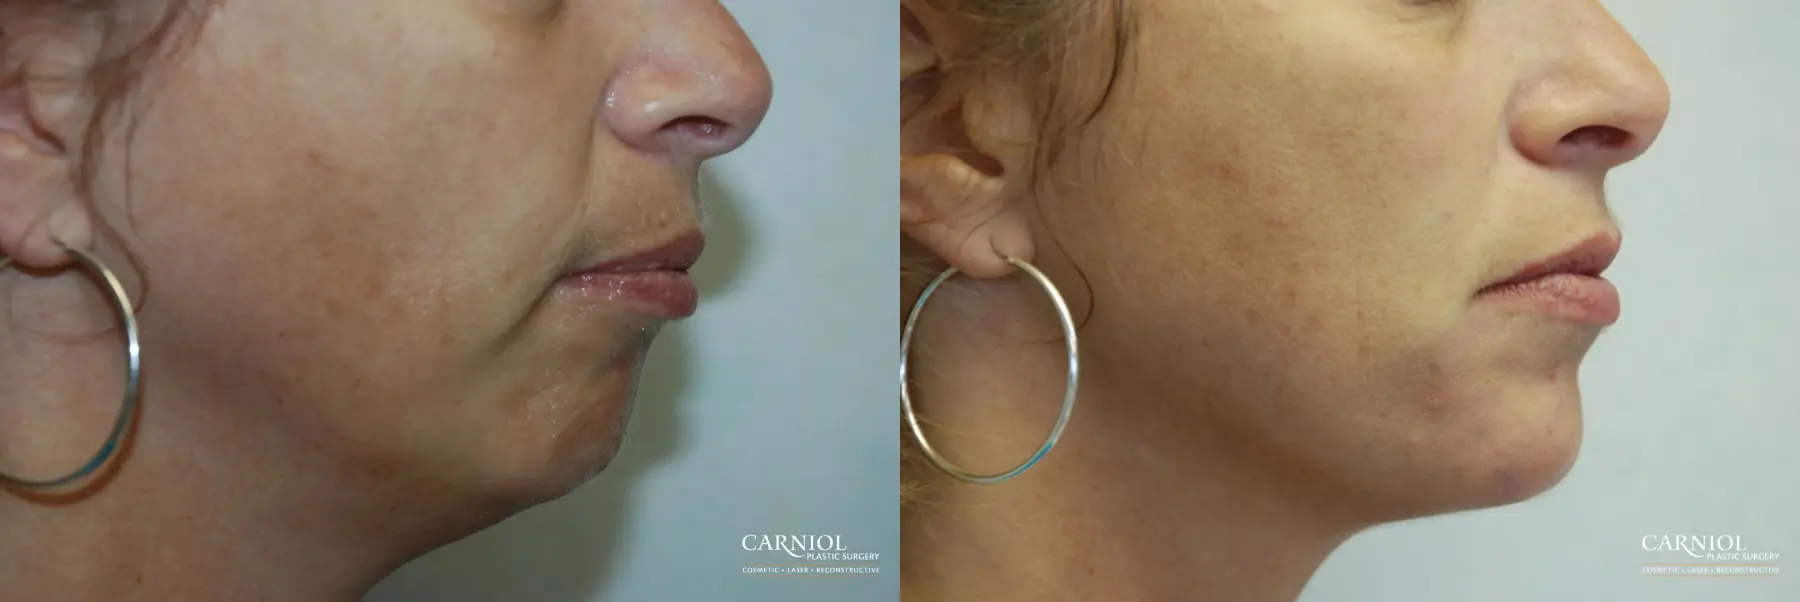 Non-Surgical Mini-Facelift: Patient 3 - Before and After  